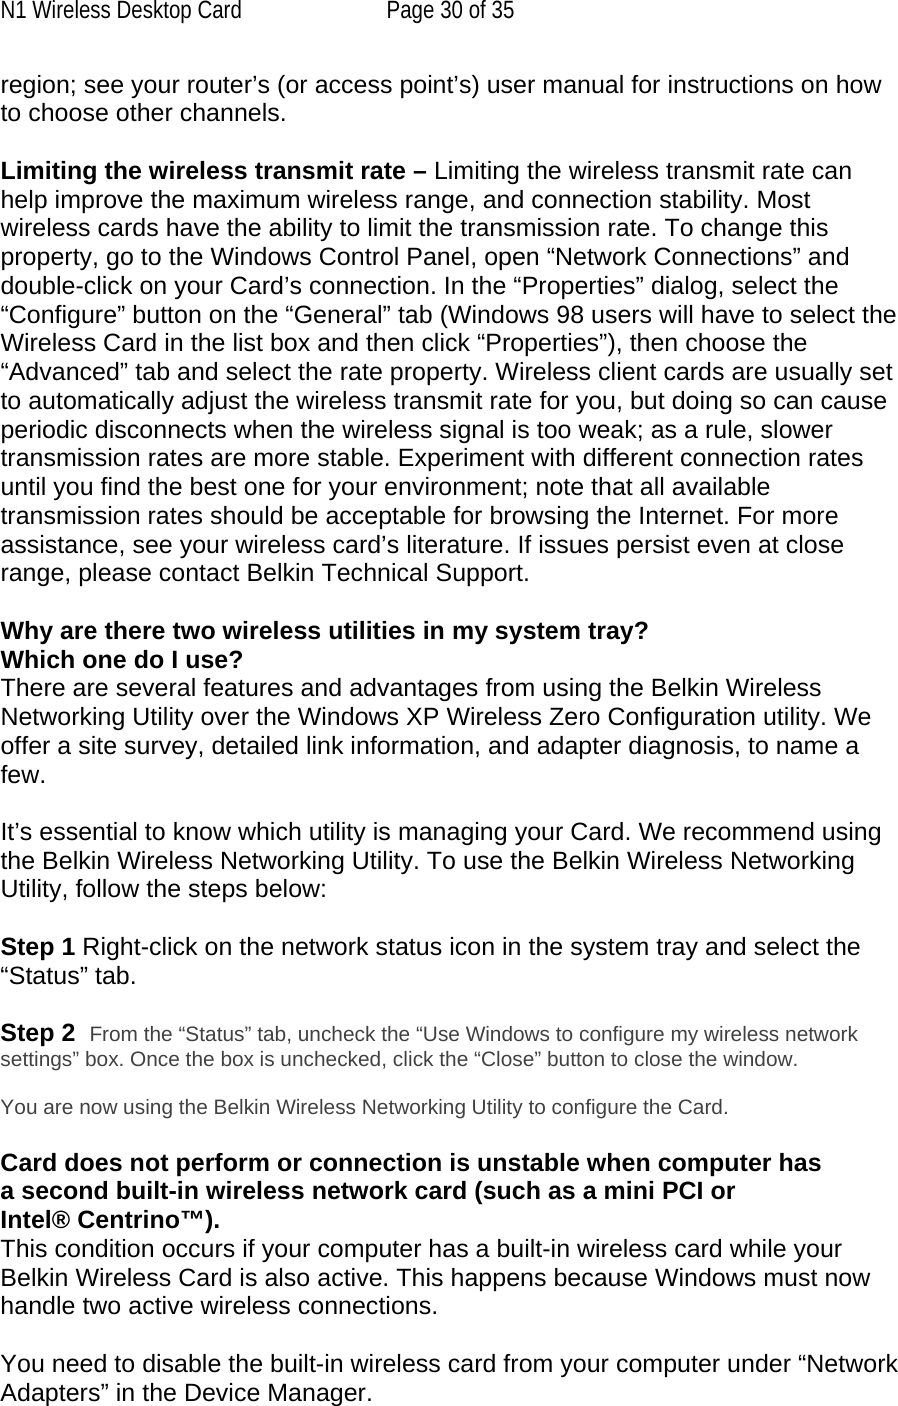 N1 Wireless Desktop Card  Page 30 of 35 region; see your router’s (or access point’s) user manual for instructions on how to choose other channels.  Limiting the wireless transmit rate – Limiting the wireless transmit rate can help improve the maximum wireless range, and connection stability. Most wireless cards have the ability to limit the transmission rate. To change this property, go to the Windows Control Panel, open “Network Connections” and double-click on your Card’s connection. In the “Properties” dialog, select the “Configure” button on the “General” tab (Windows 98 users will have to select the Wireless Card in the list box and then click “Properties”), then choose the “Advanced” tab and select the rate property. Wireless client cards are usually set to automatically adjust the wireless transmit rate for you, but doing so can cause periodic disconnects when the wireless signal is too weak; as a rule, slower transmission rates are more stable. Experiment with different connection rates until you find the best one for your environment; note that all available transmission rates should be acceptable for browsing the Internet. For more assistance, see your wireless card’s literature. If issues persist even at close range, please contact Belkin Technical Support.  Why are there two wireless utilities in my system tray? Which one do I use? There are several features and advantages from using the Belkin Wireless Networking Utility over the Windows XP Wireless Zero Configuration utility. We offer a site survey, detailed link information, and adapter diagnosis, to name a few.   It’s essential to know which utility is managing your Card. We recommend using the Belkin Wireless Networking Utility. To use the Belkin Wireless Networking Utility, follow the steps below:  Step 1 Right-click on the network status icon in the system tray and select the “Status” tab.    Step 2  From the “Status” tab, uncheck the “Use Windows to configure my wireless network settings” box. Once the box is unchecked, click the “Close” button to close the window.  You are now using the Belkin Wireless Networking Utility to configure the Card.  Card does not perform or connection is unstable when computer has a second built-in wireless network card (such as a mini PCI or Intel® Centrino™). This condition occurs if your computer has a built-in wireless card while your Belkin Wireless Card is also active. This happens because Windows must now handle two active wireless connections.  You need to disable the built-in wireless card from your computer under “Network Adapters” in the Device Manager. 